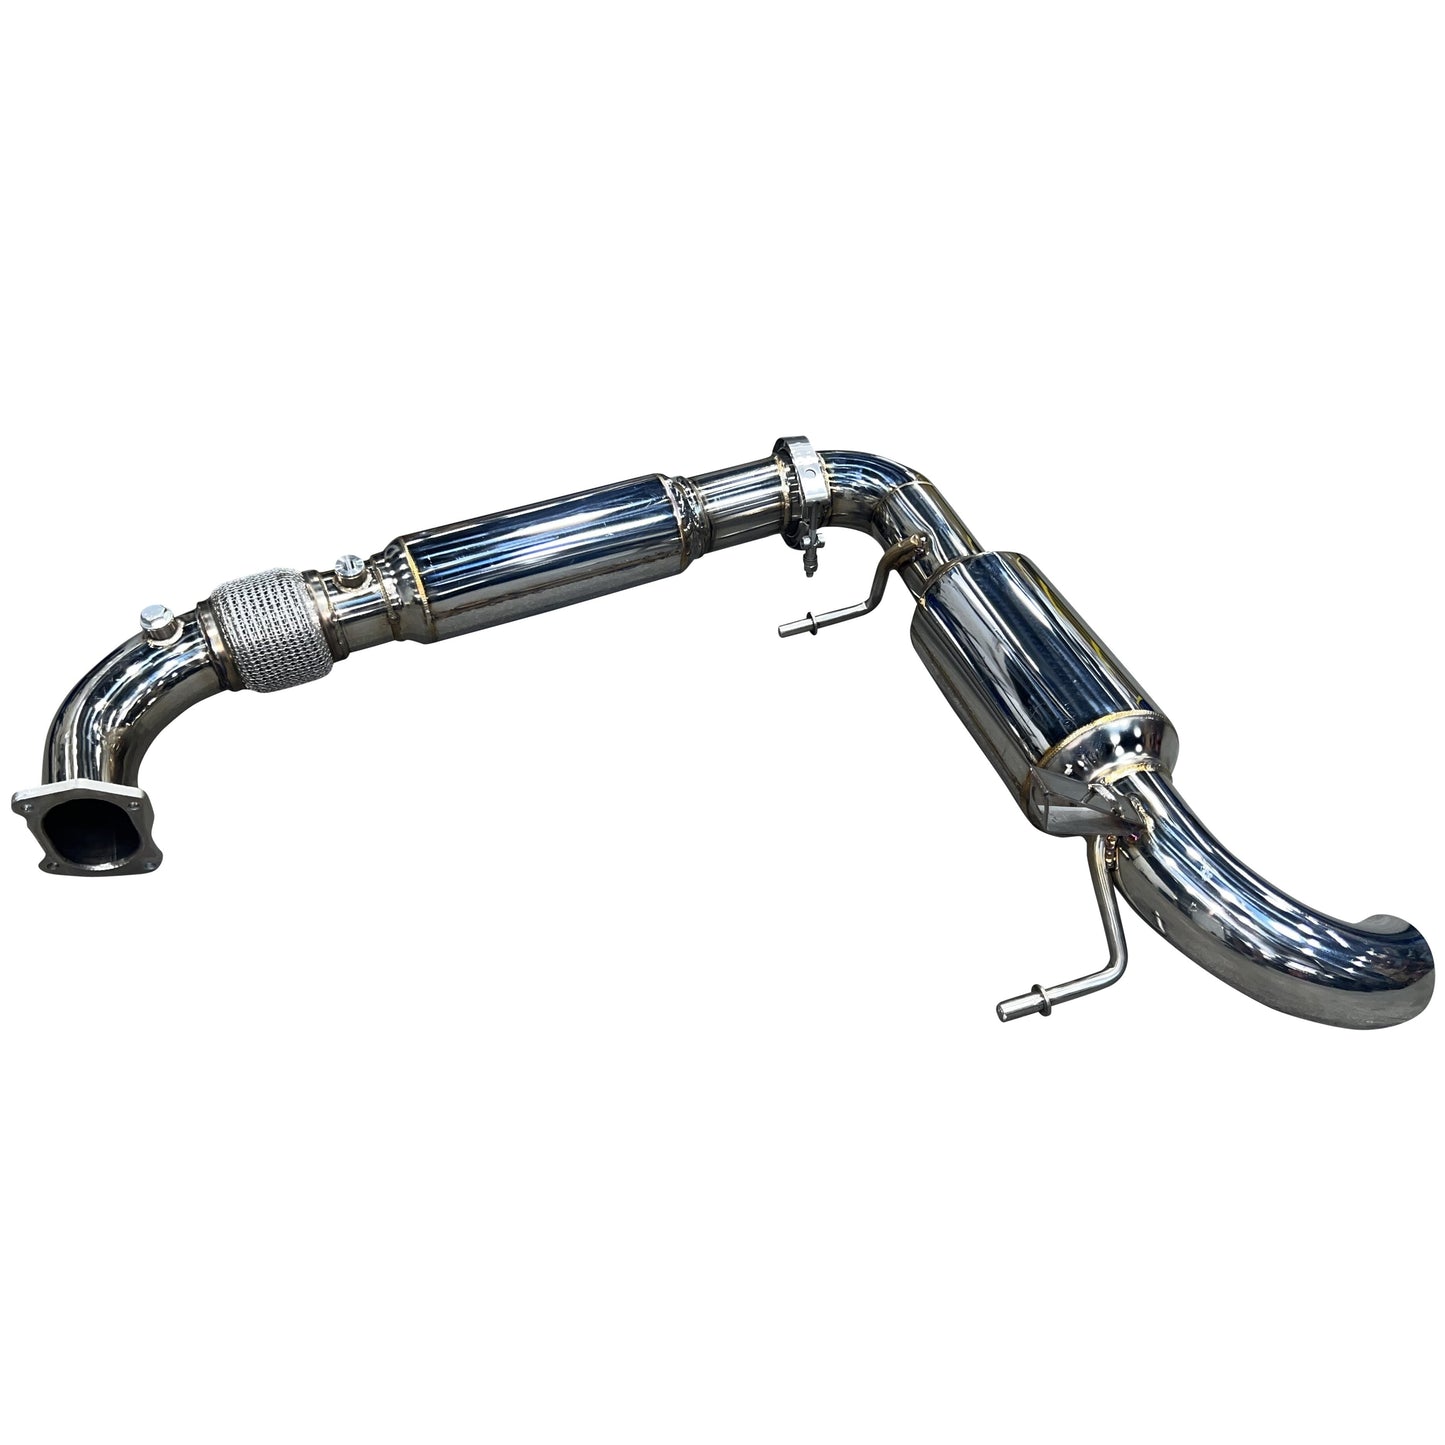 RZR Pro XP & Turbo R FULL 3" Exhaust ~ RPM Monster Core 3" Muffler & Mid Pipe